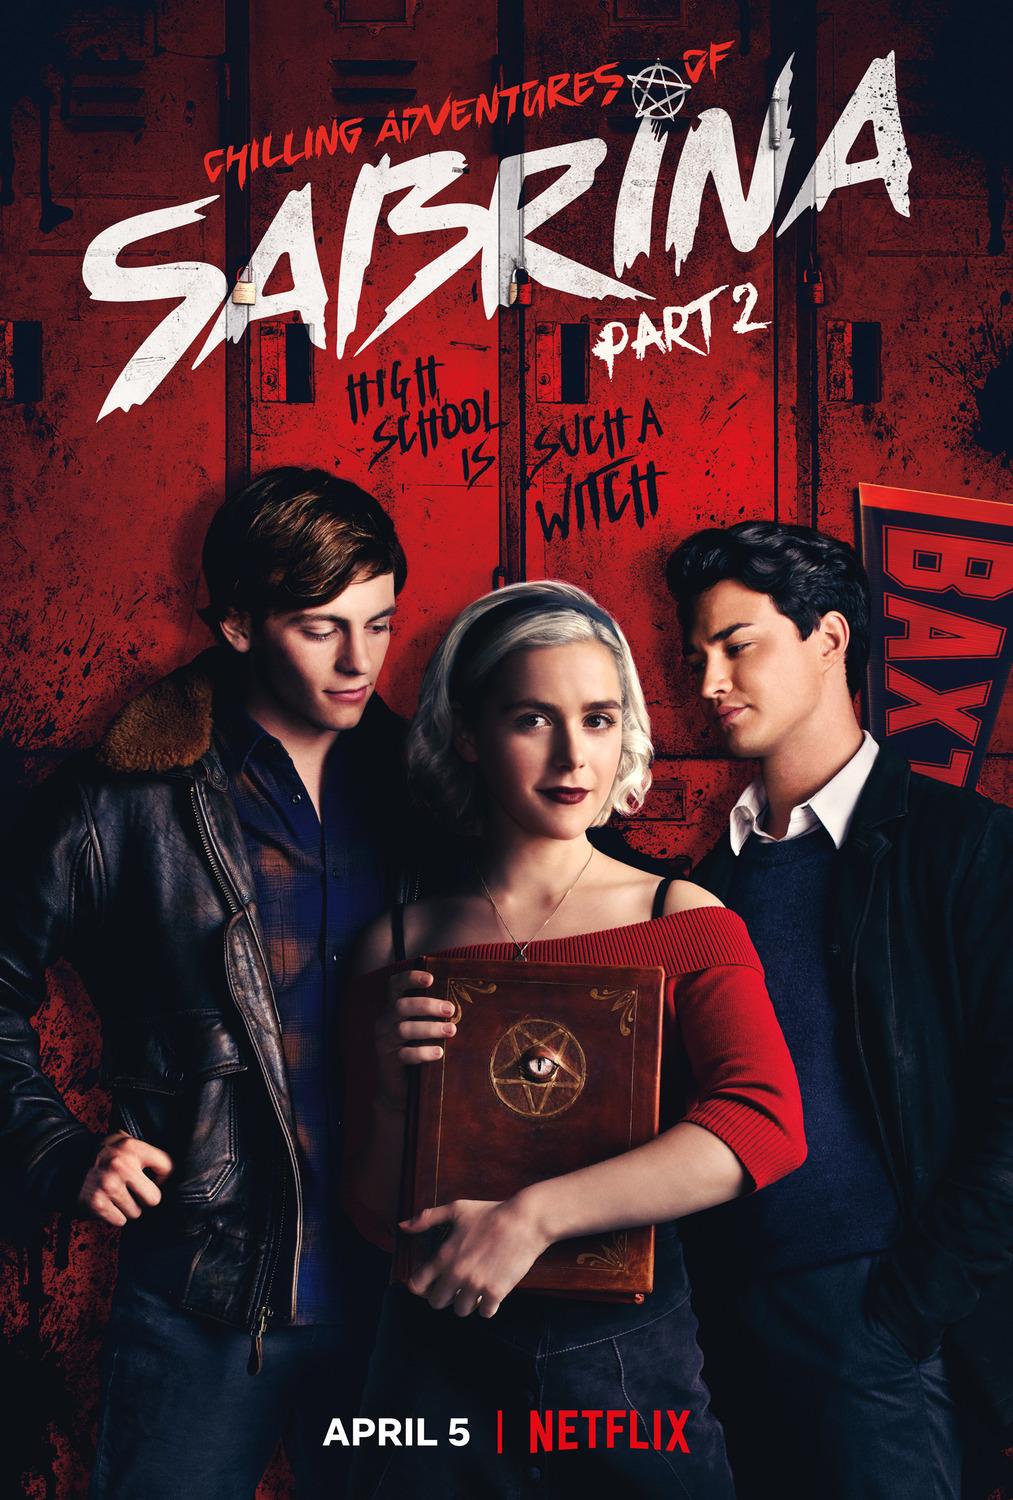 Chilling Adventures of Sabrina (TV Series 2018– )